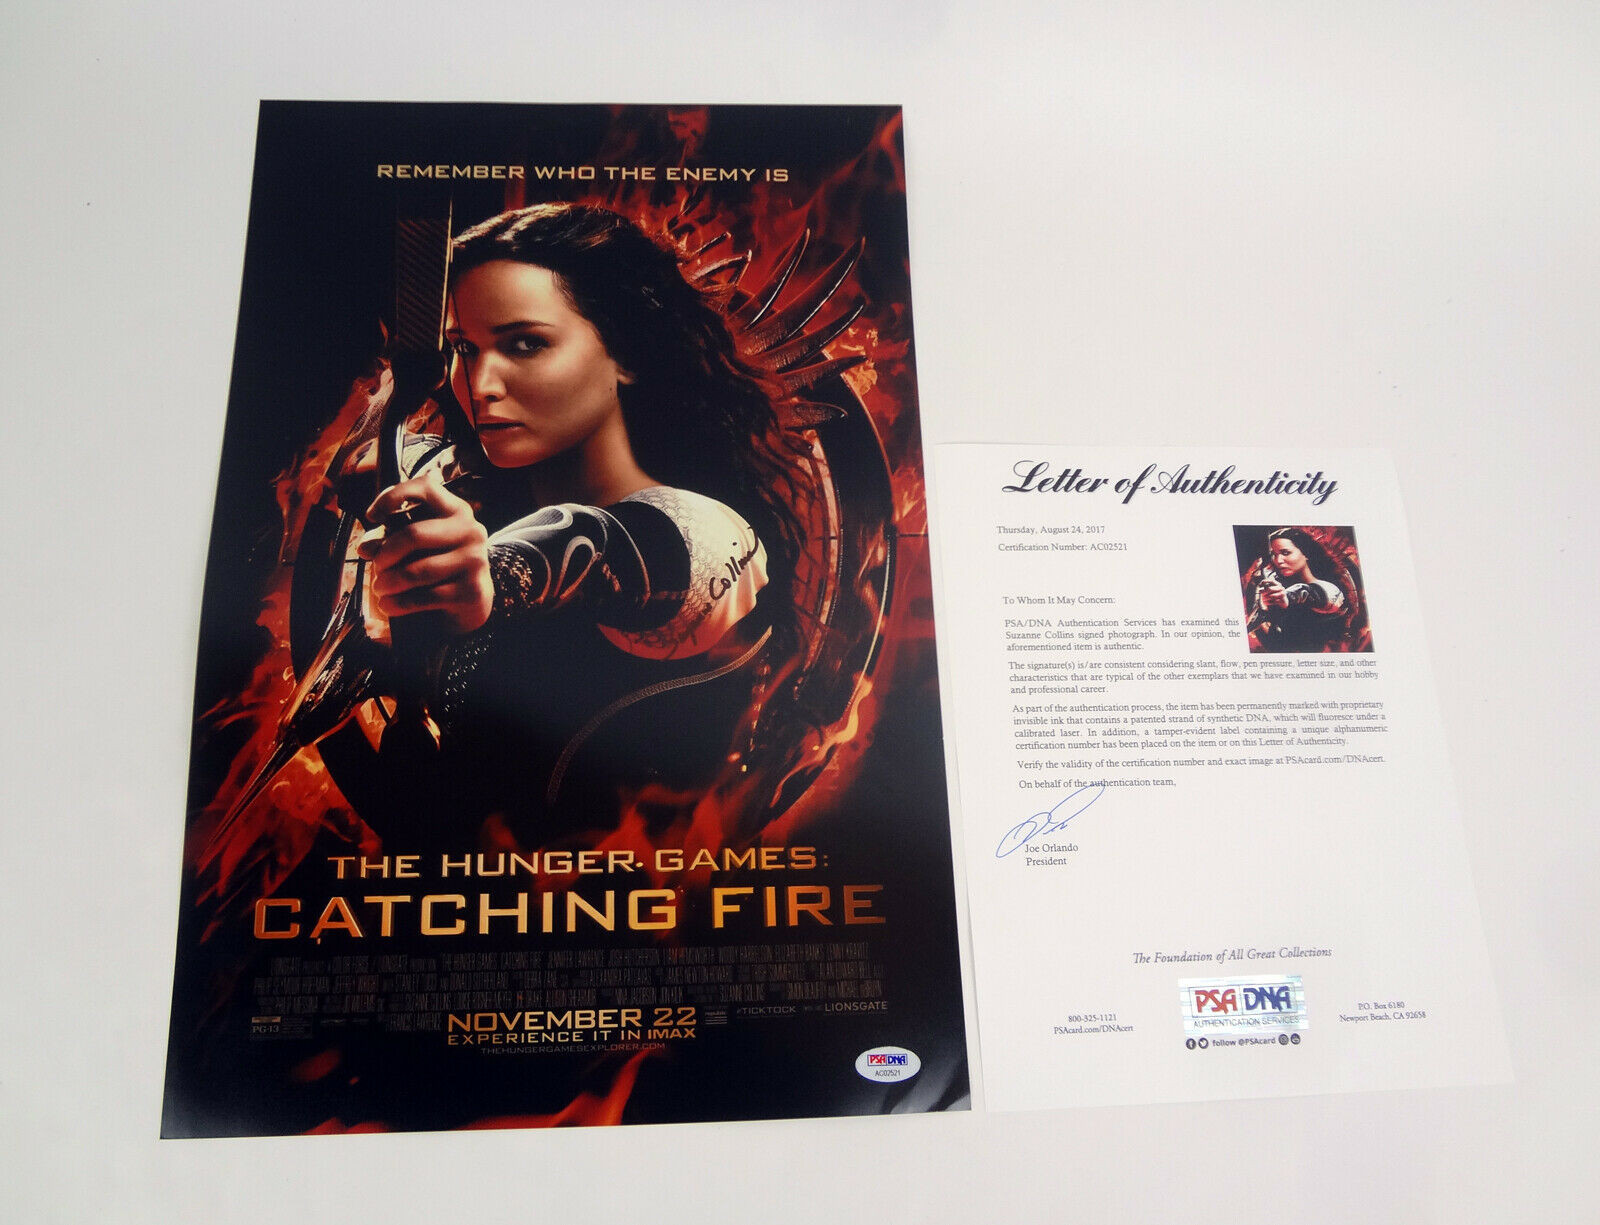 catching fire movie poster beach